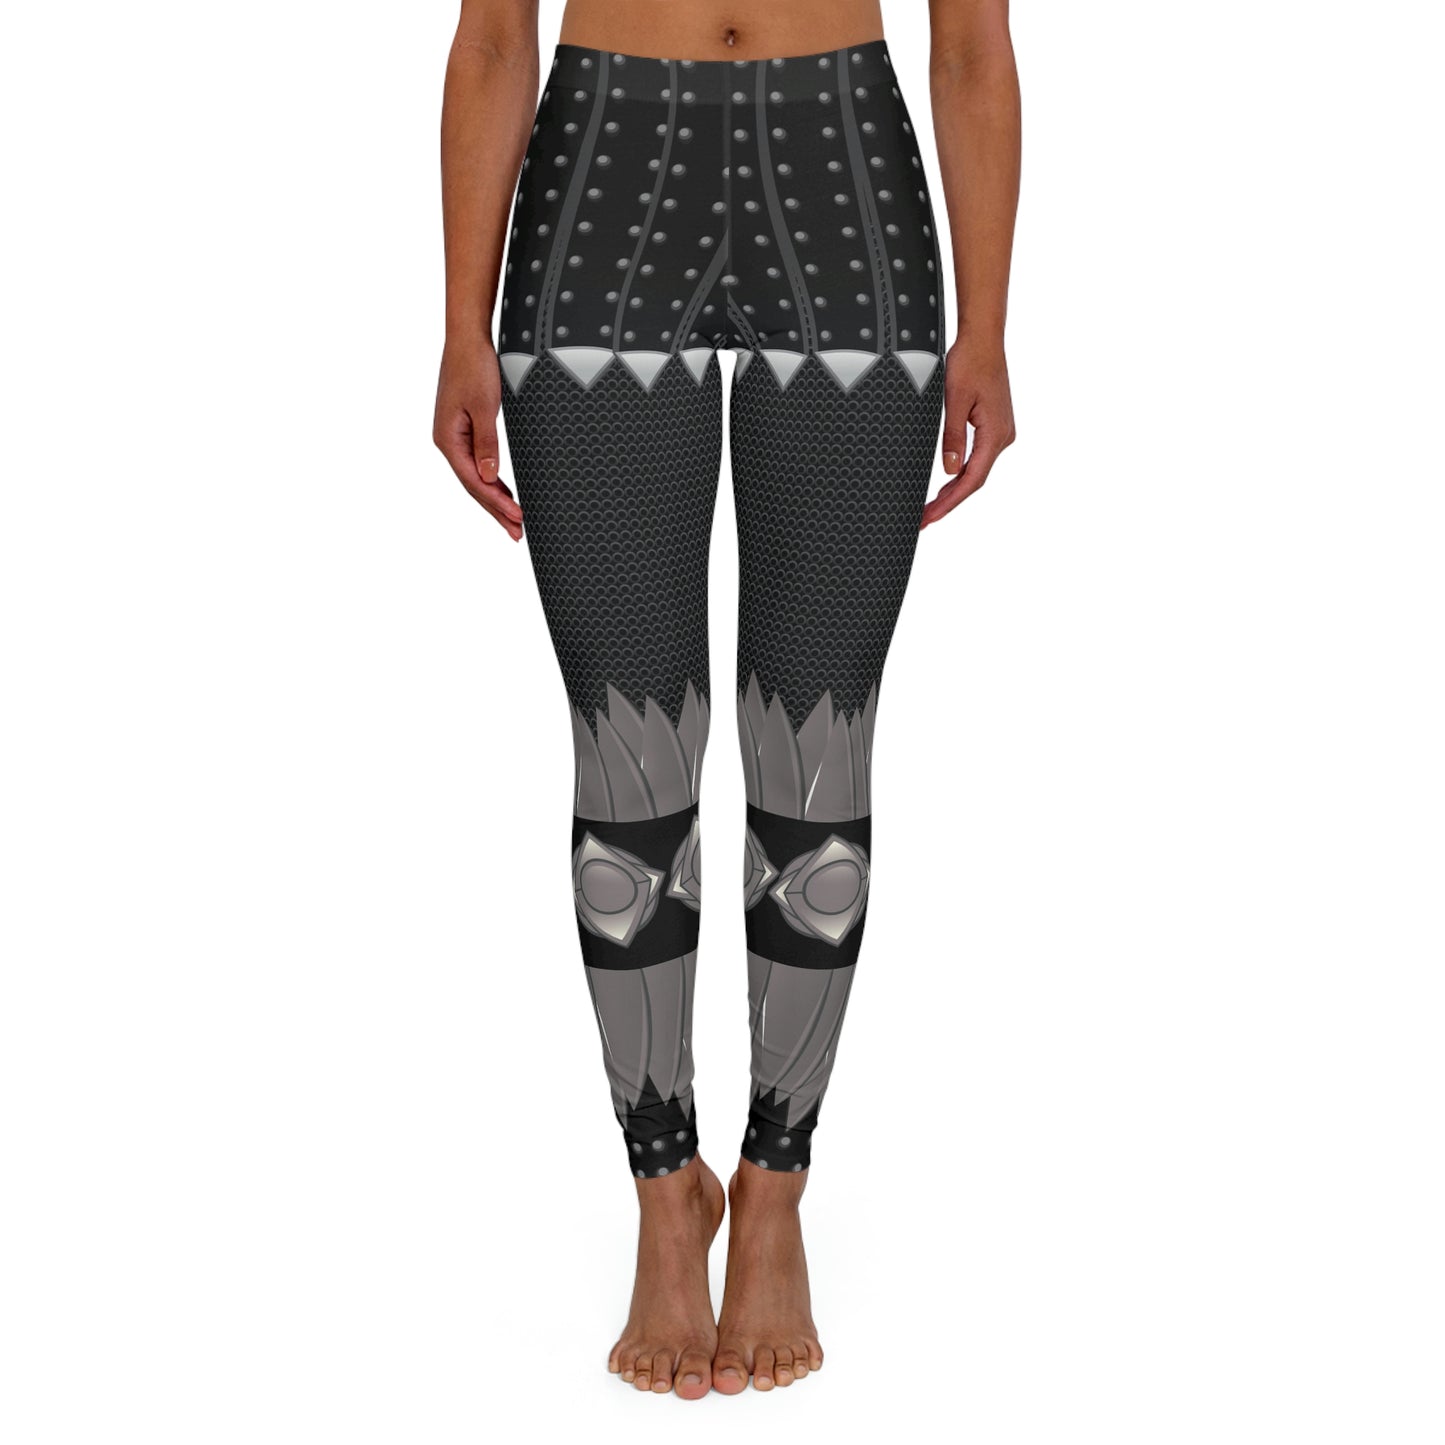 Viking Pants Cute Women Leggings, One of a Kind Gift - Unique Workout Activewear tights for Wife fitness, Mother, Girlfriend Christmas Gift